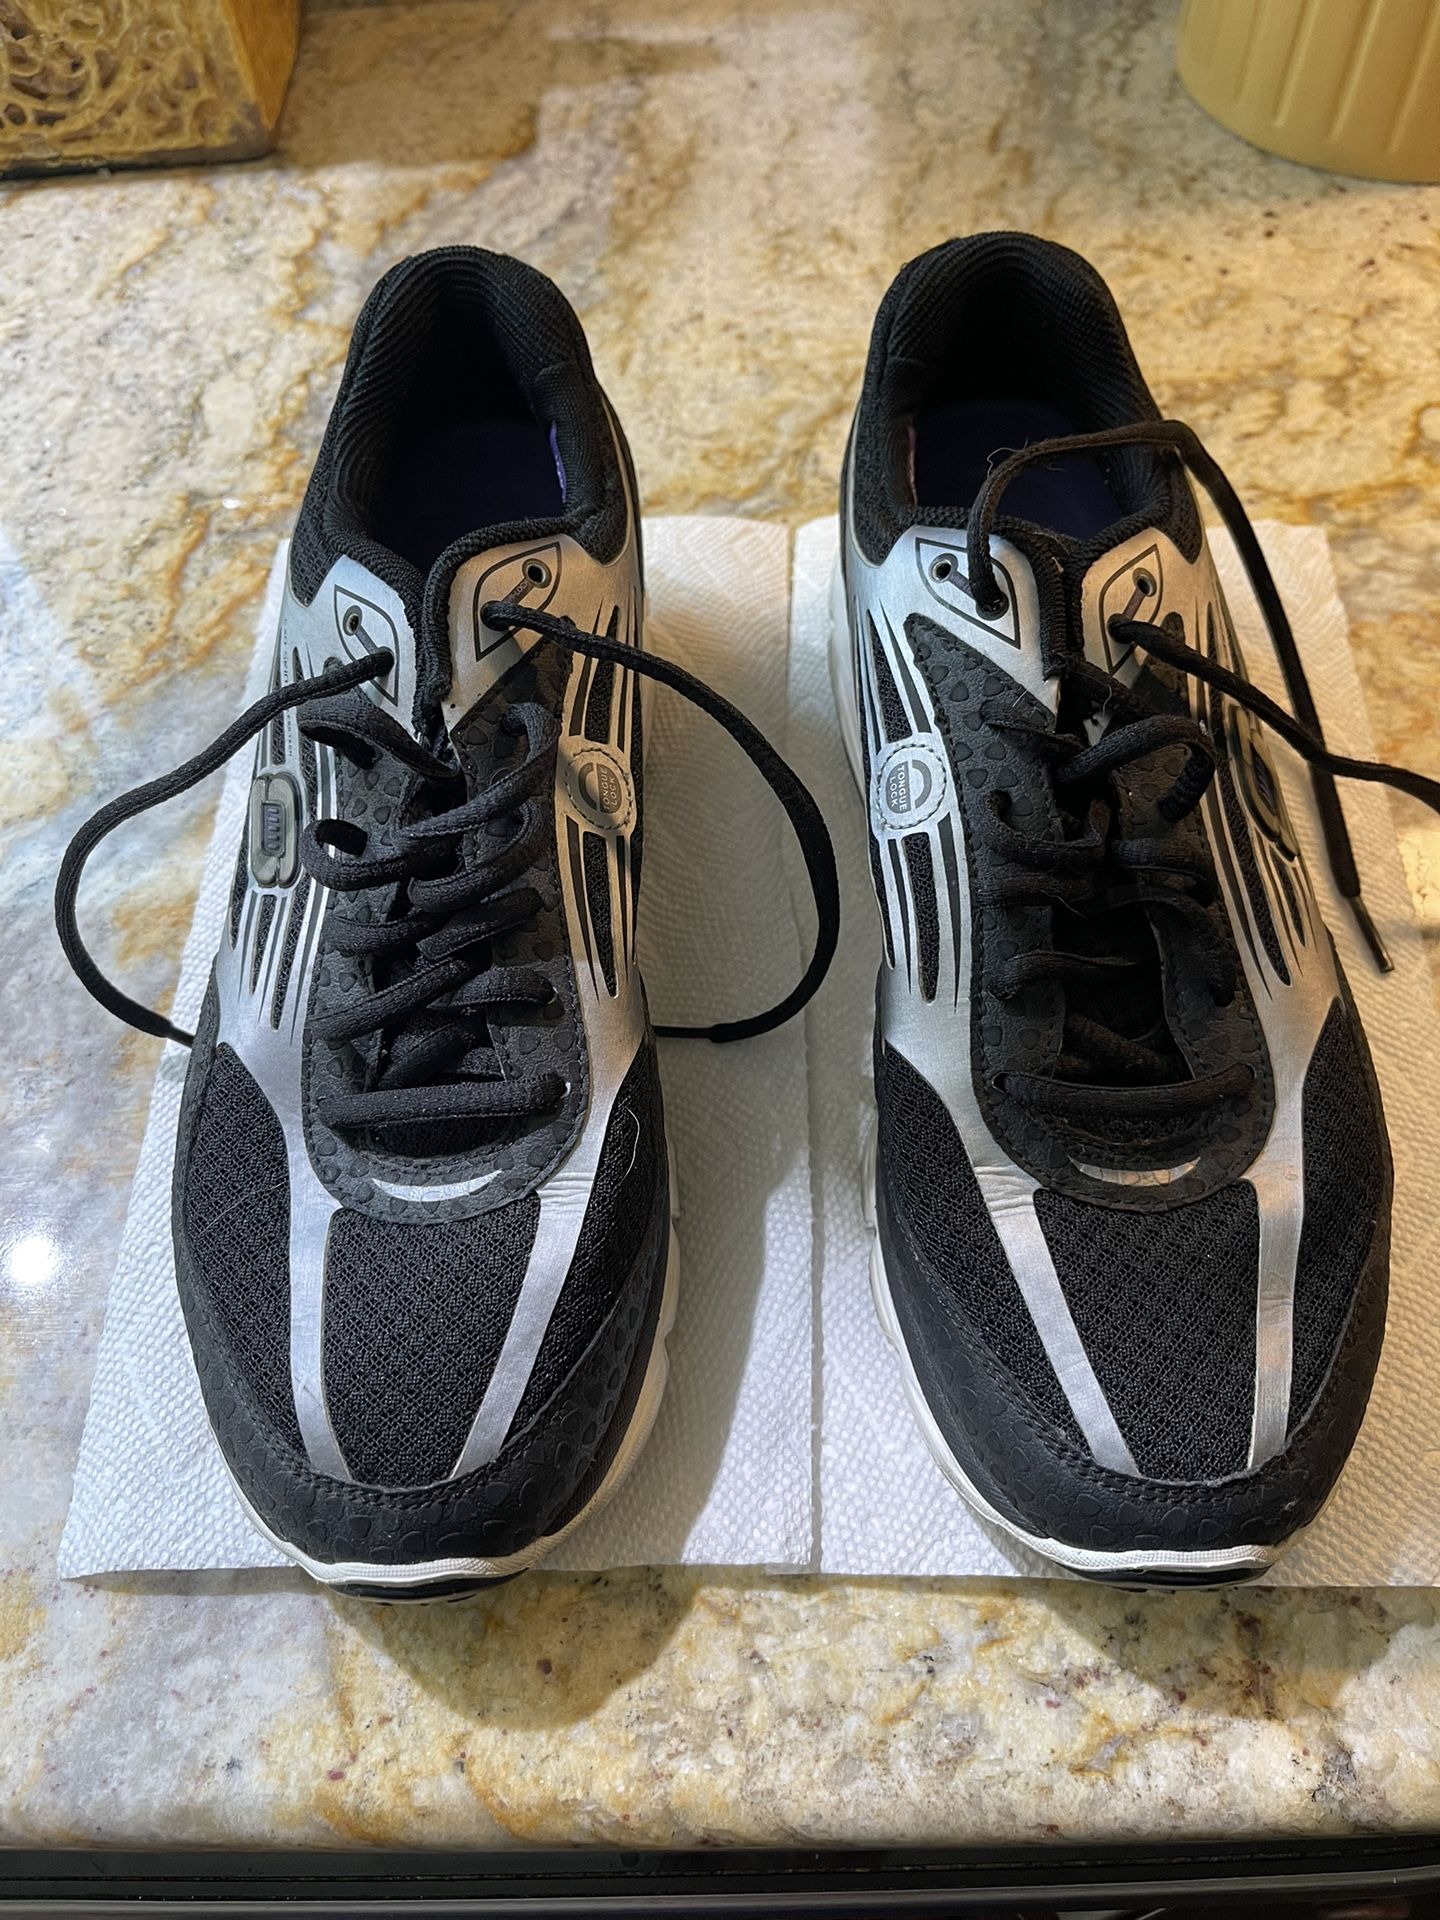 SKECHERS Black/Silver Sneakers - Size for Sale in Providence, - OfferUp